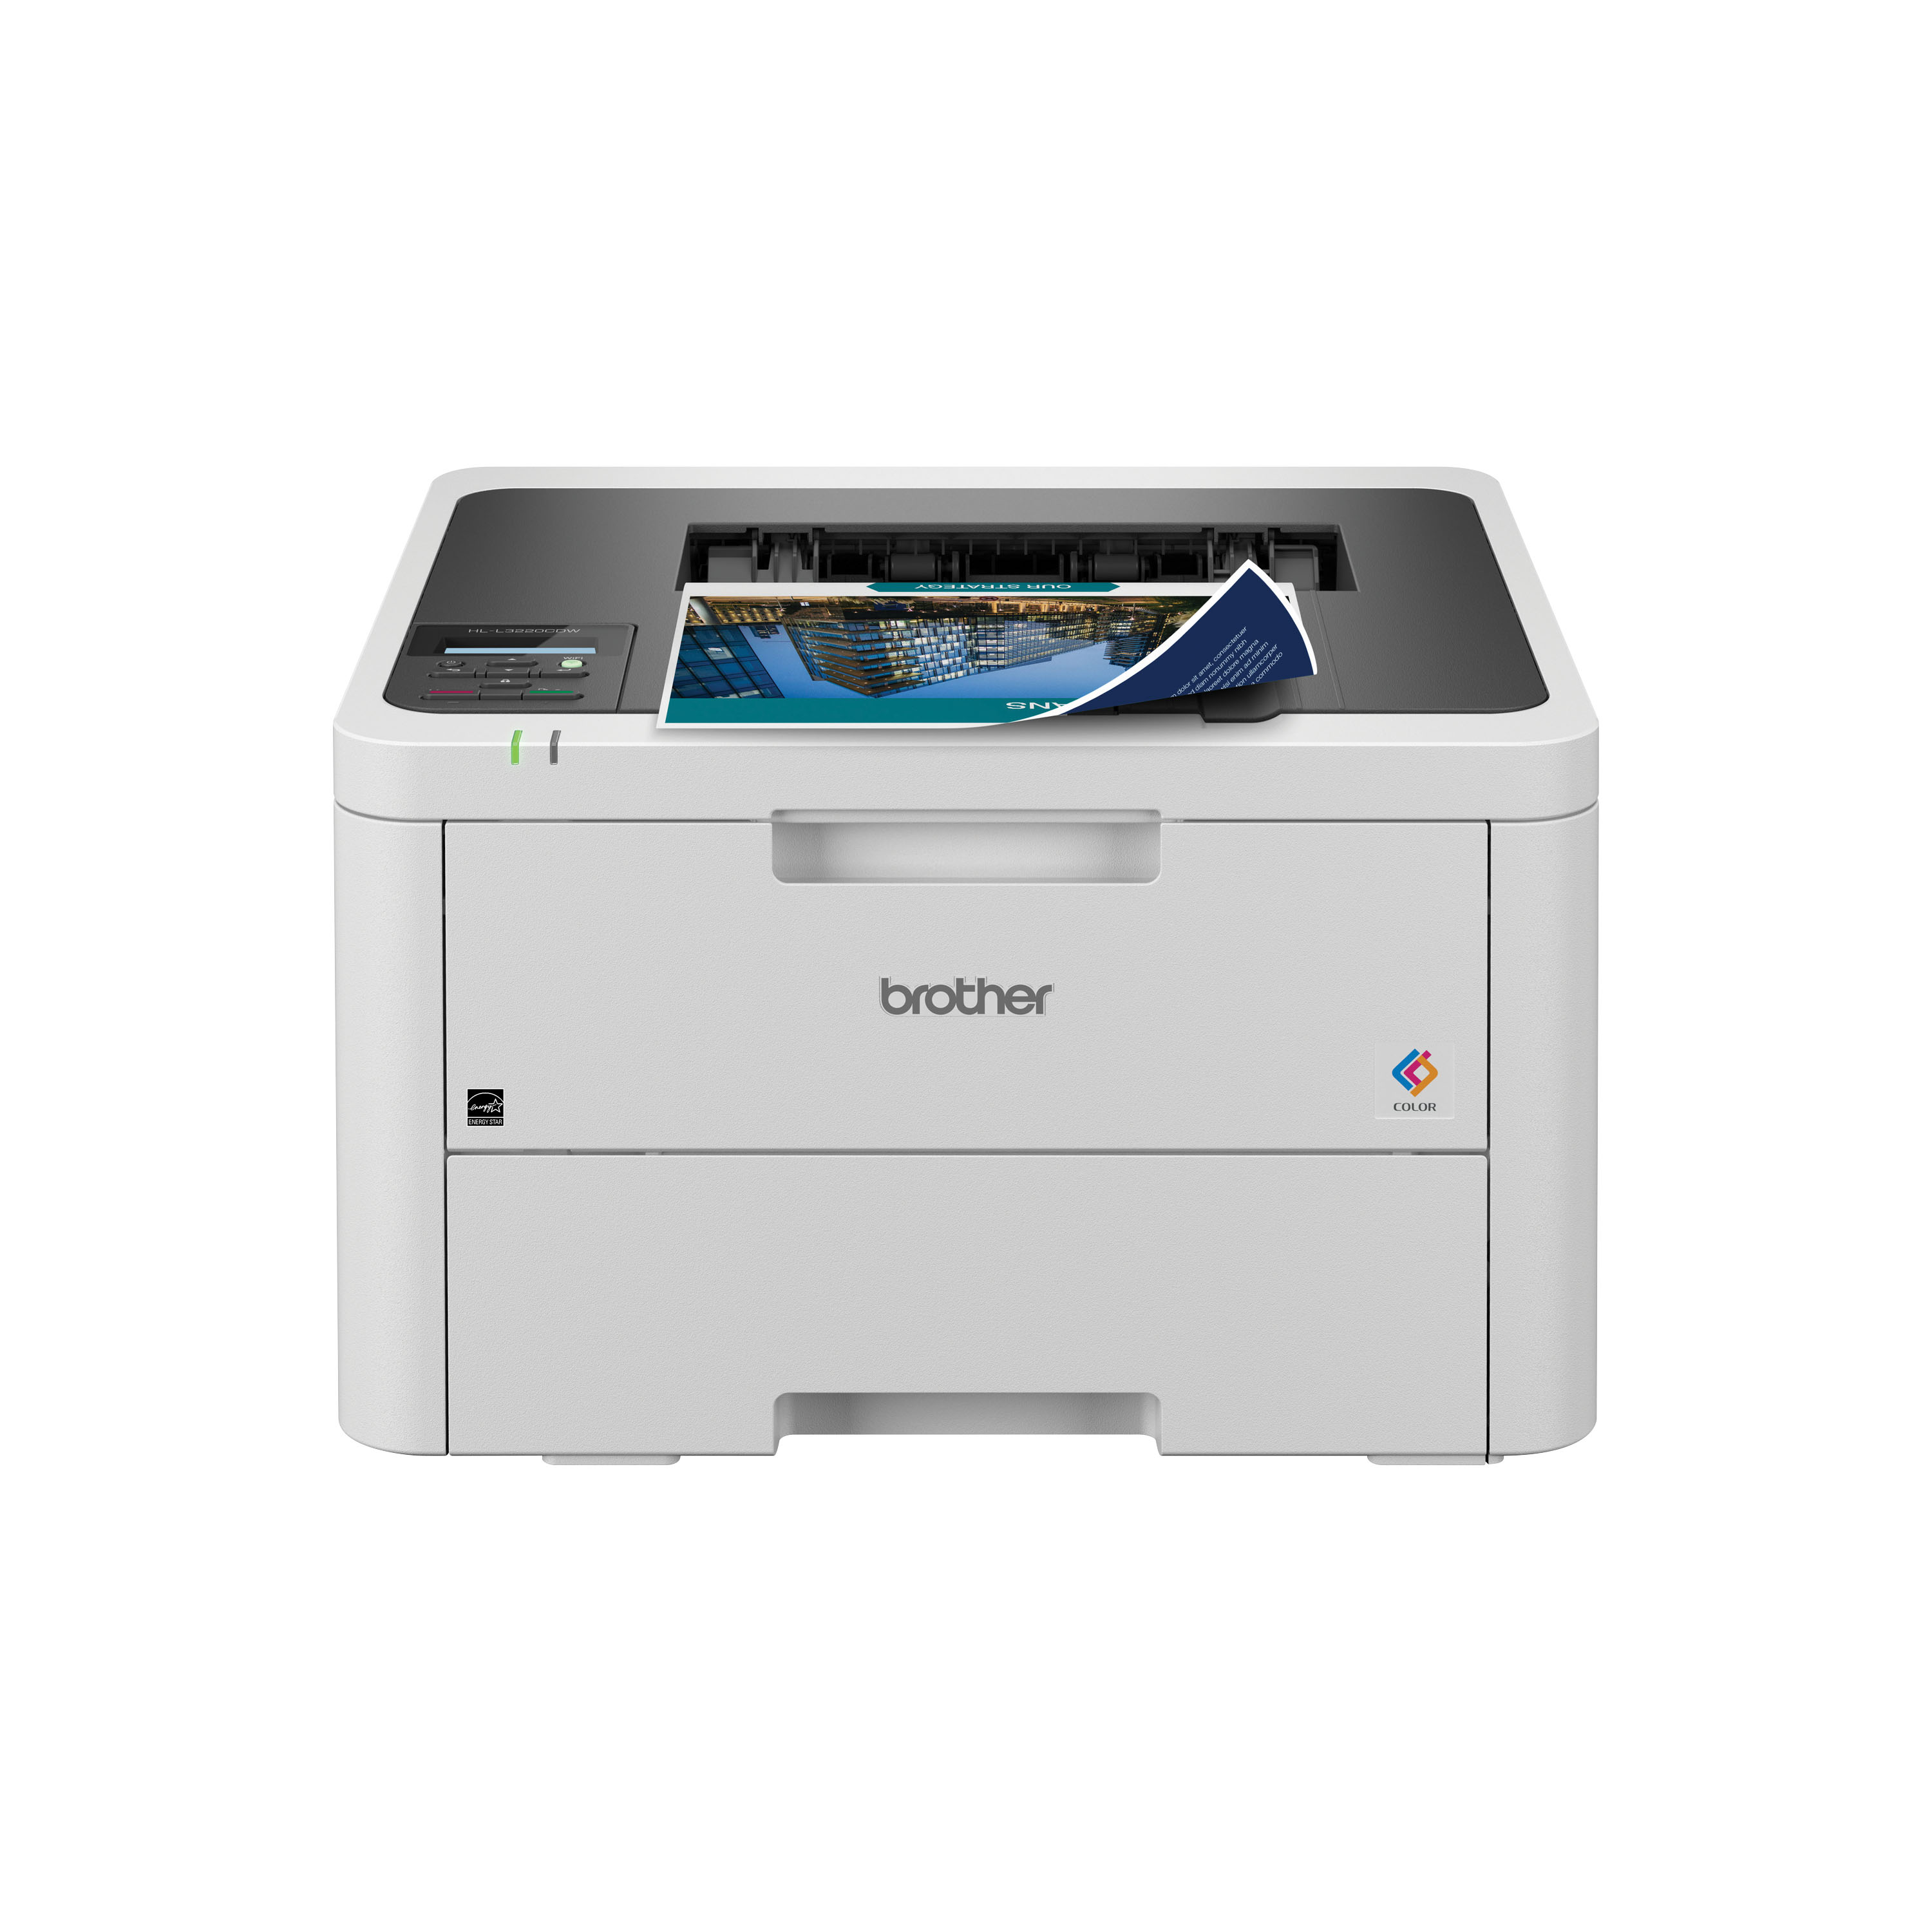 Brother MFC-L3750CDW AIO Printer - TechPro Business Solutions Ltd